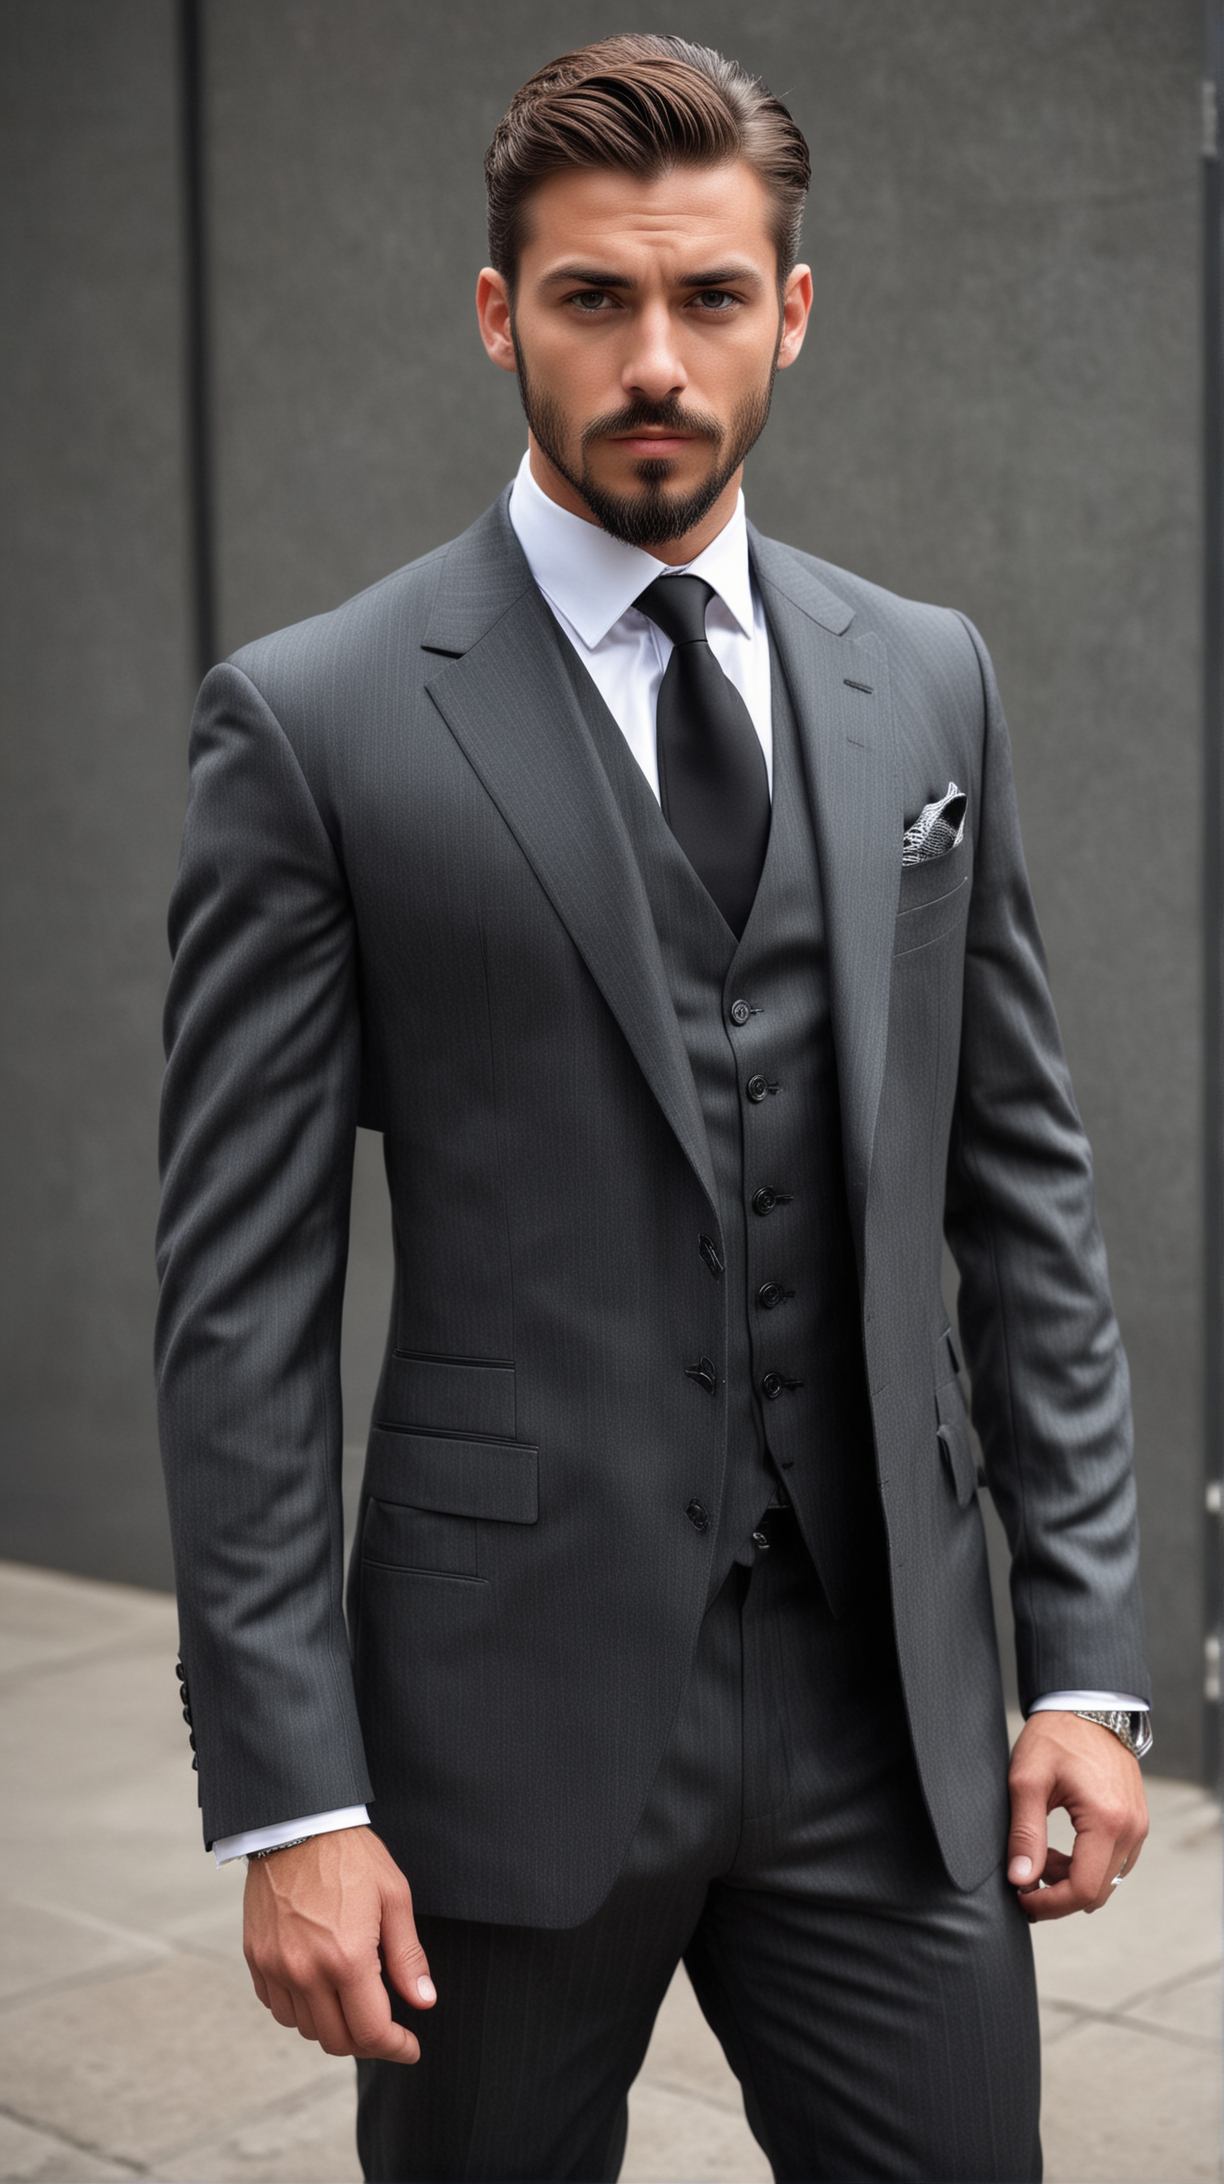 Powerful Businessman with Piercing Eyes in Tailored Suit